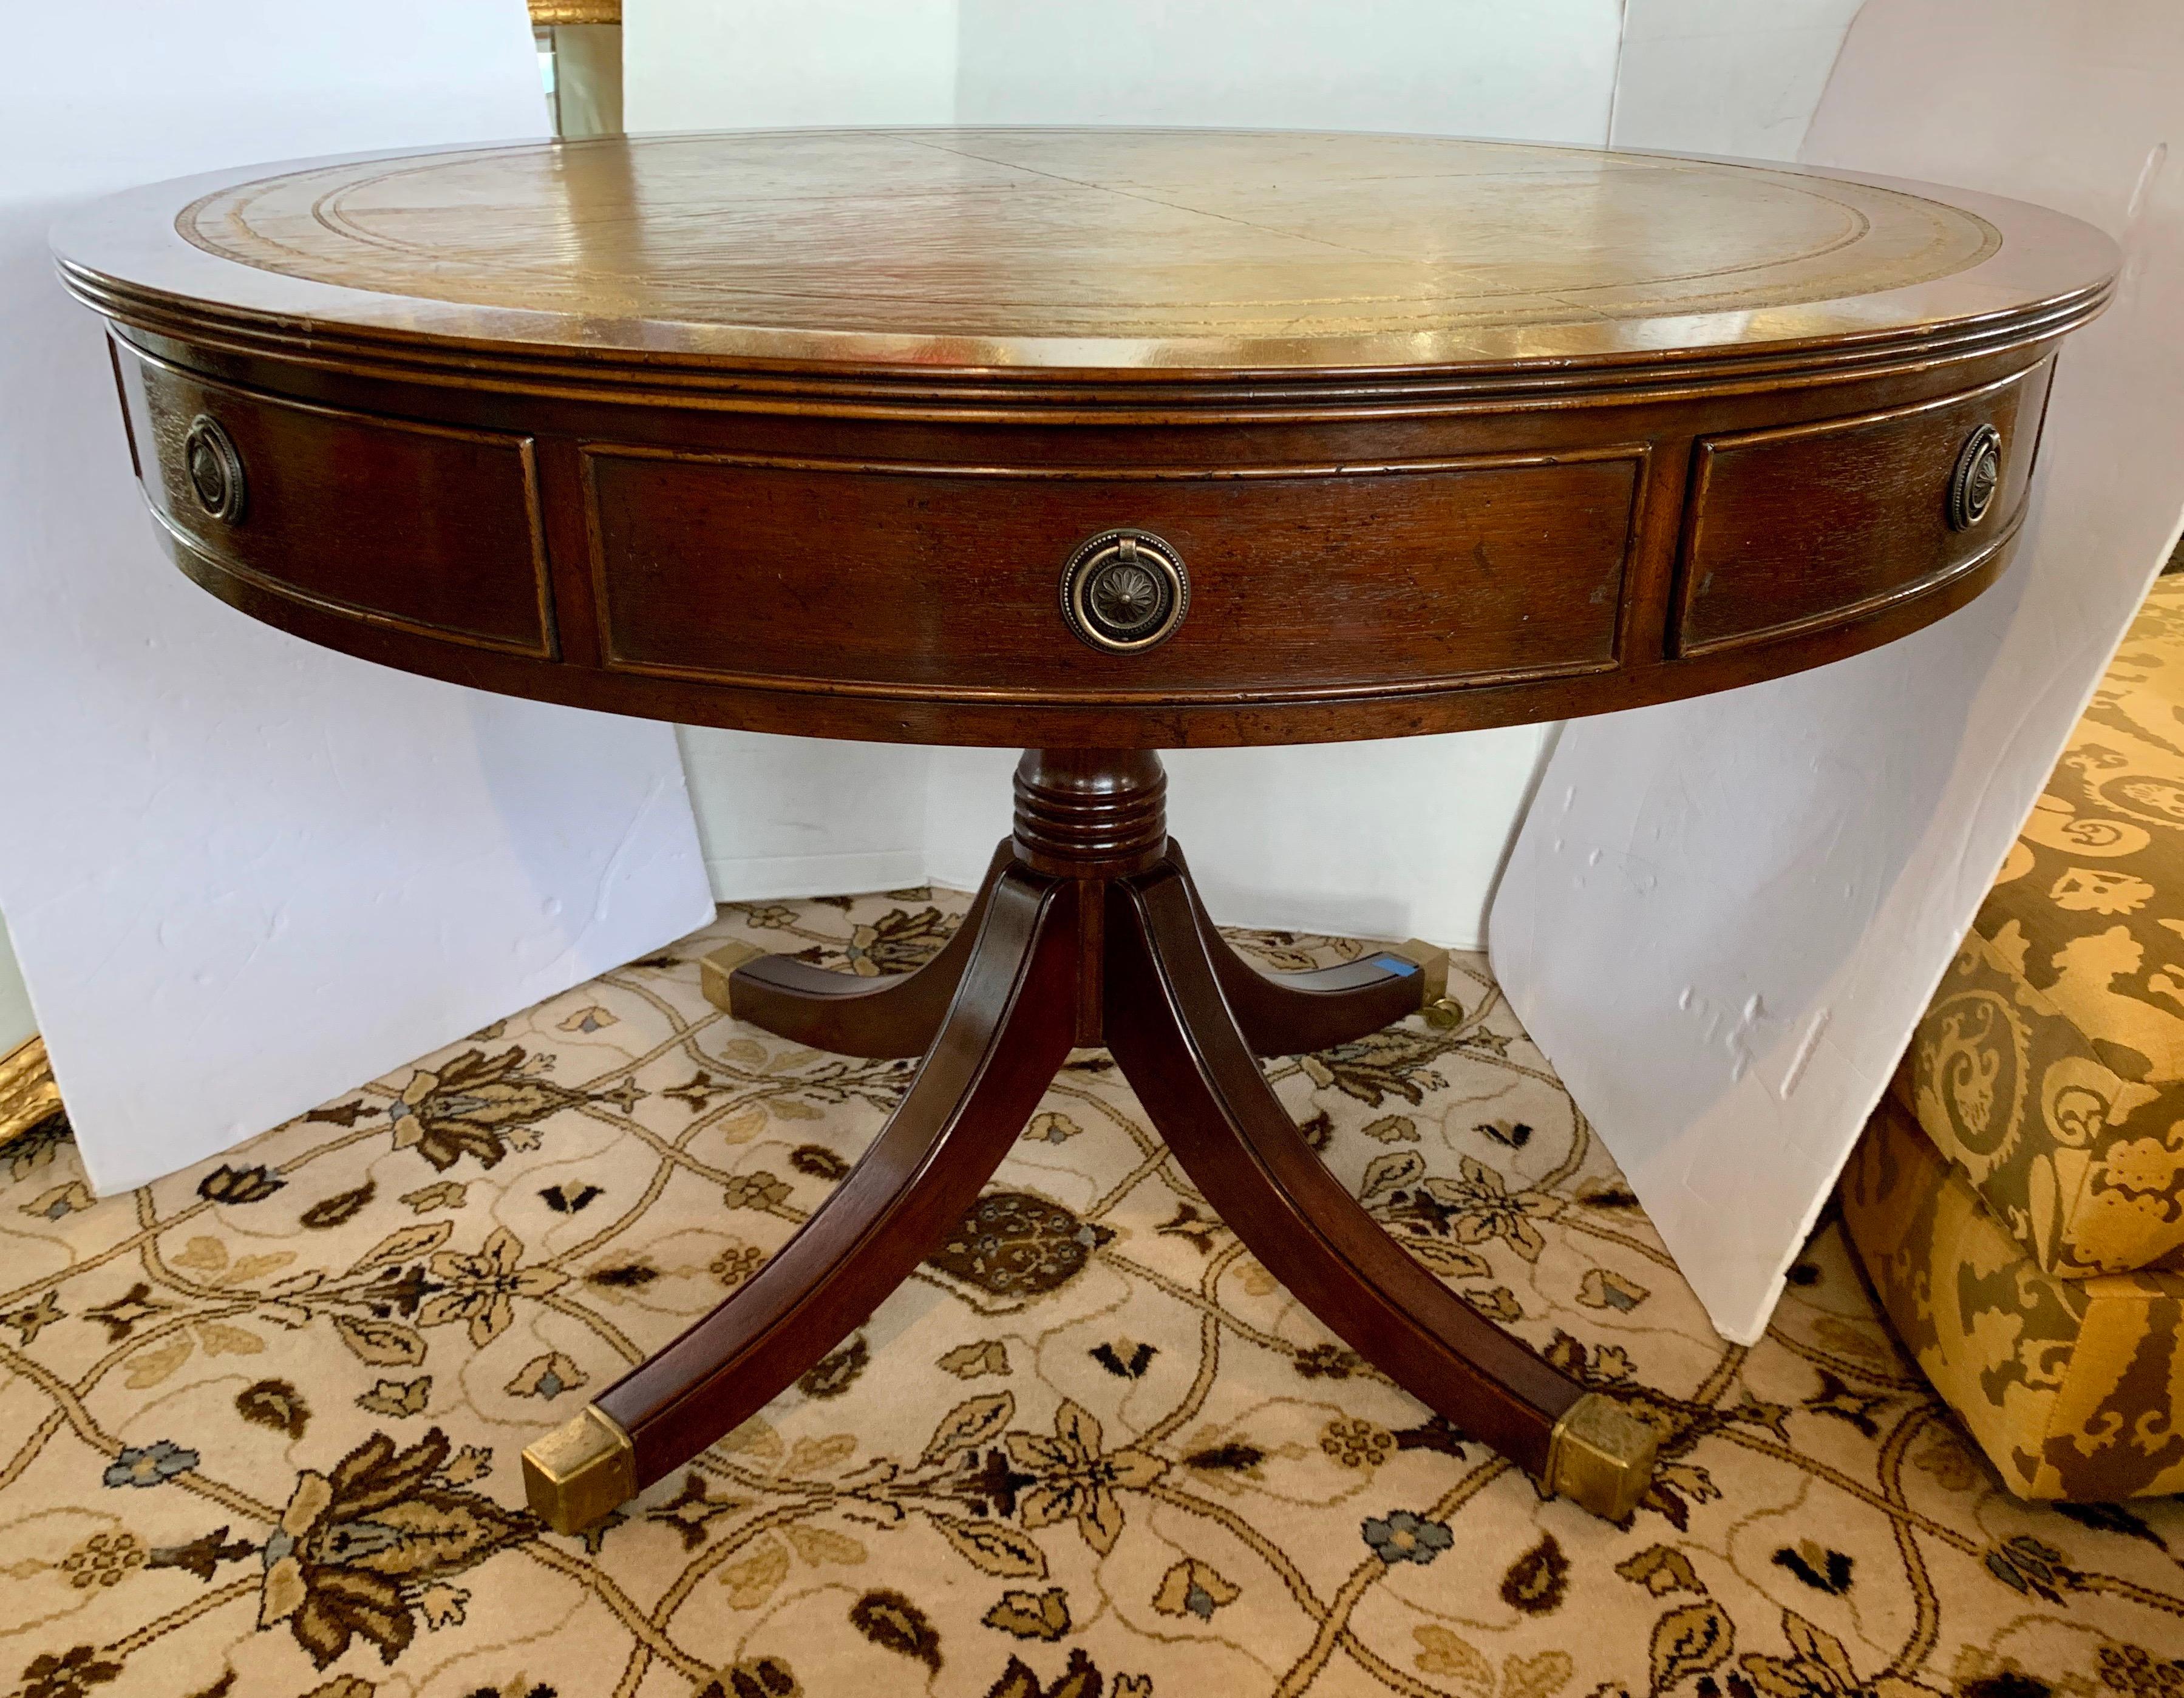 This large handsome George III leather top mahogany drum-table has a tooled leather insert top and includes four drawers and four dummy drawers with original brass handles. The table sits on a baluster pedestal base with brass capped casters. Use as